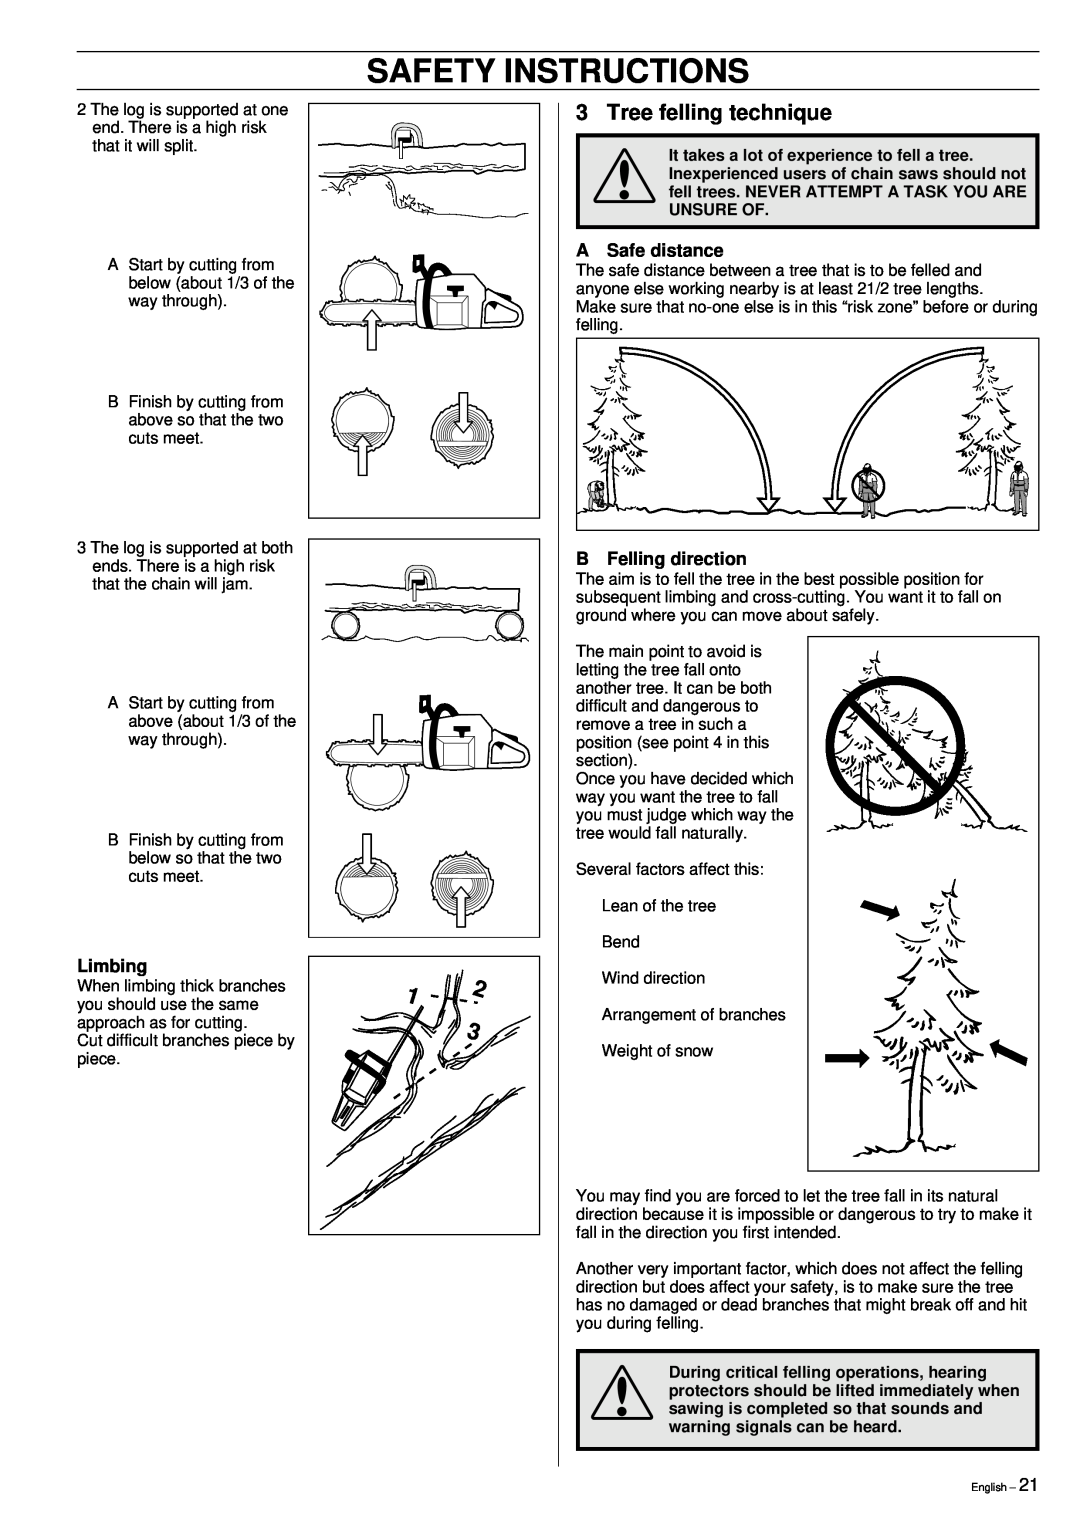 Husqvarna 355 manual Tree felling technique, A Safe distance, Limbing, B Felling direction, Safety Instructions 